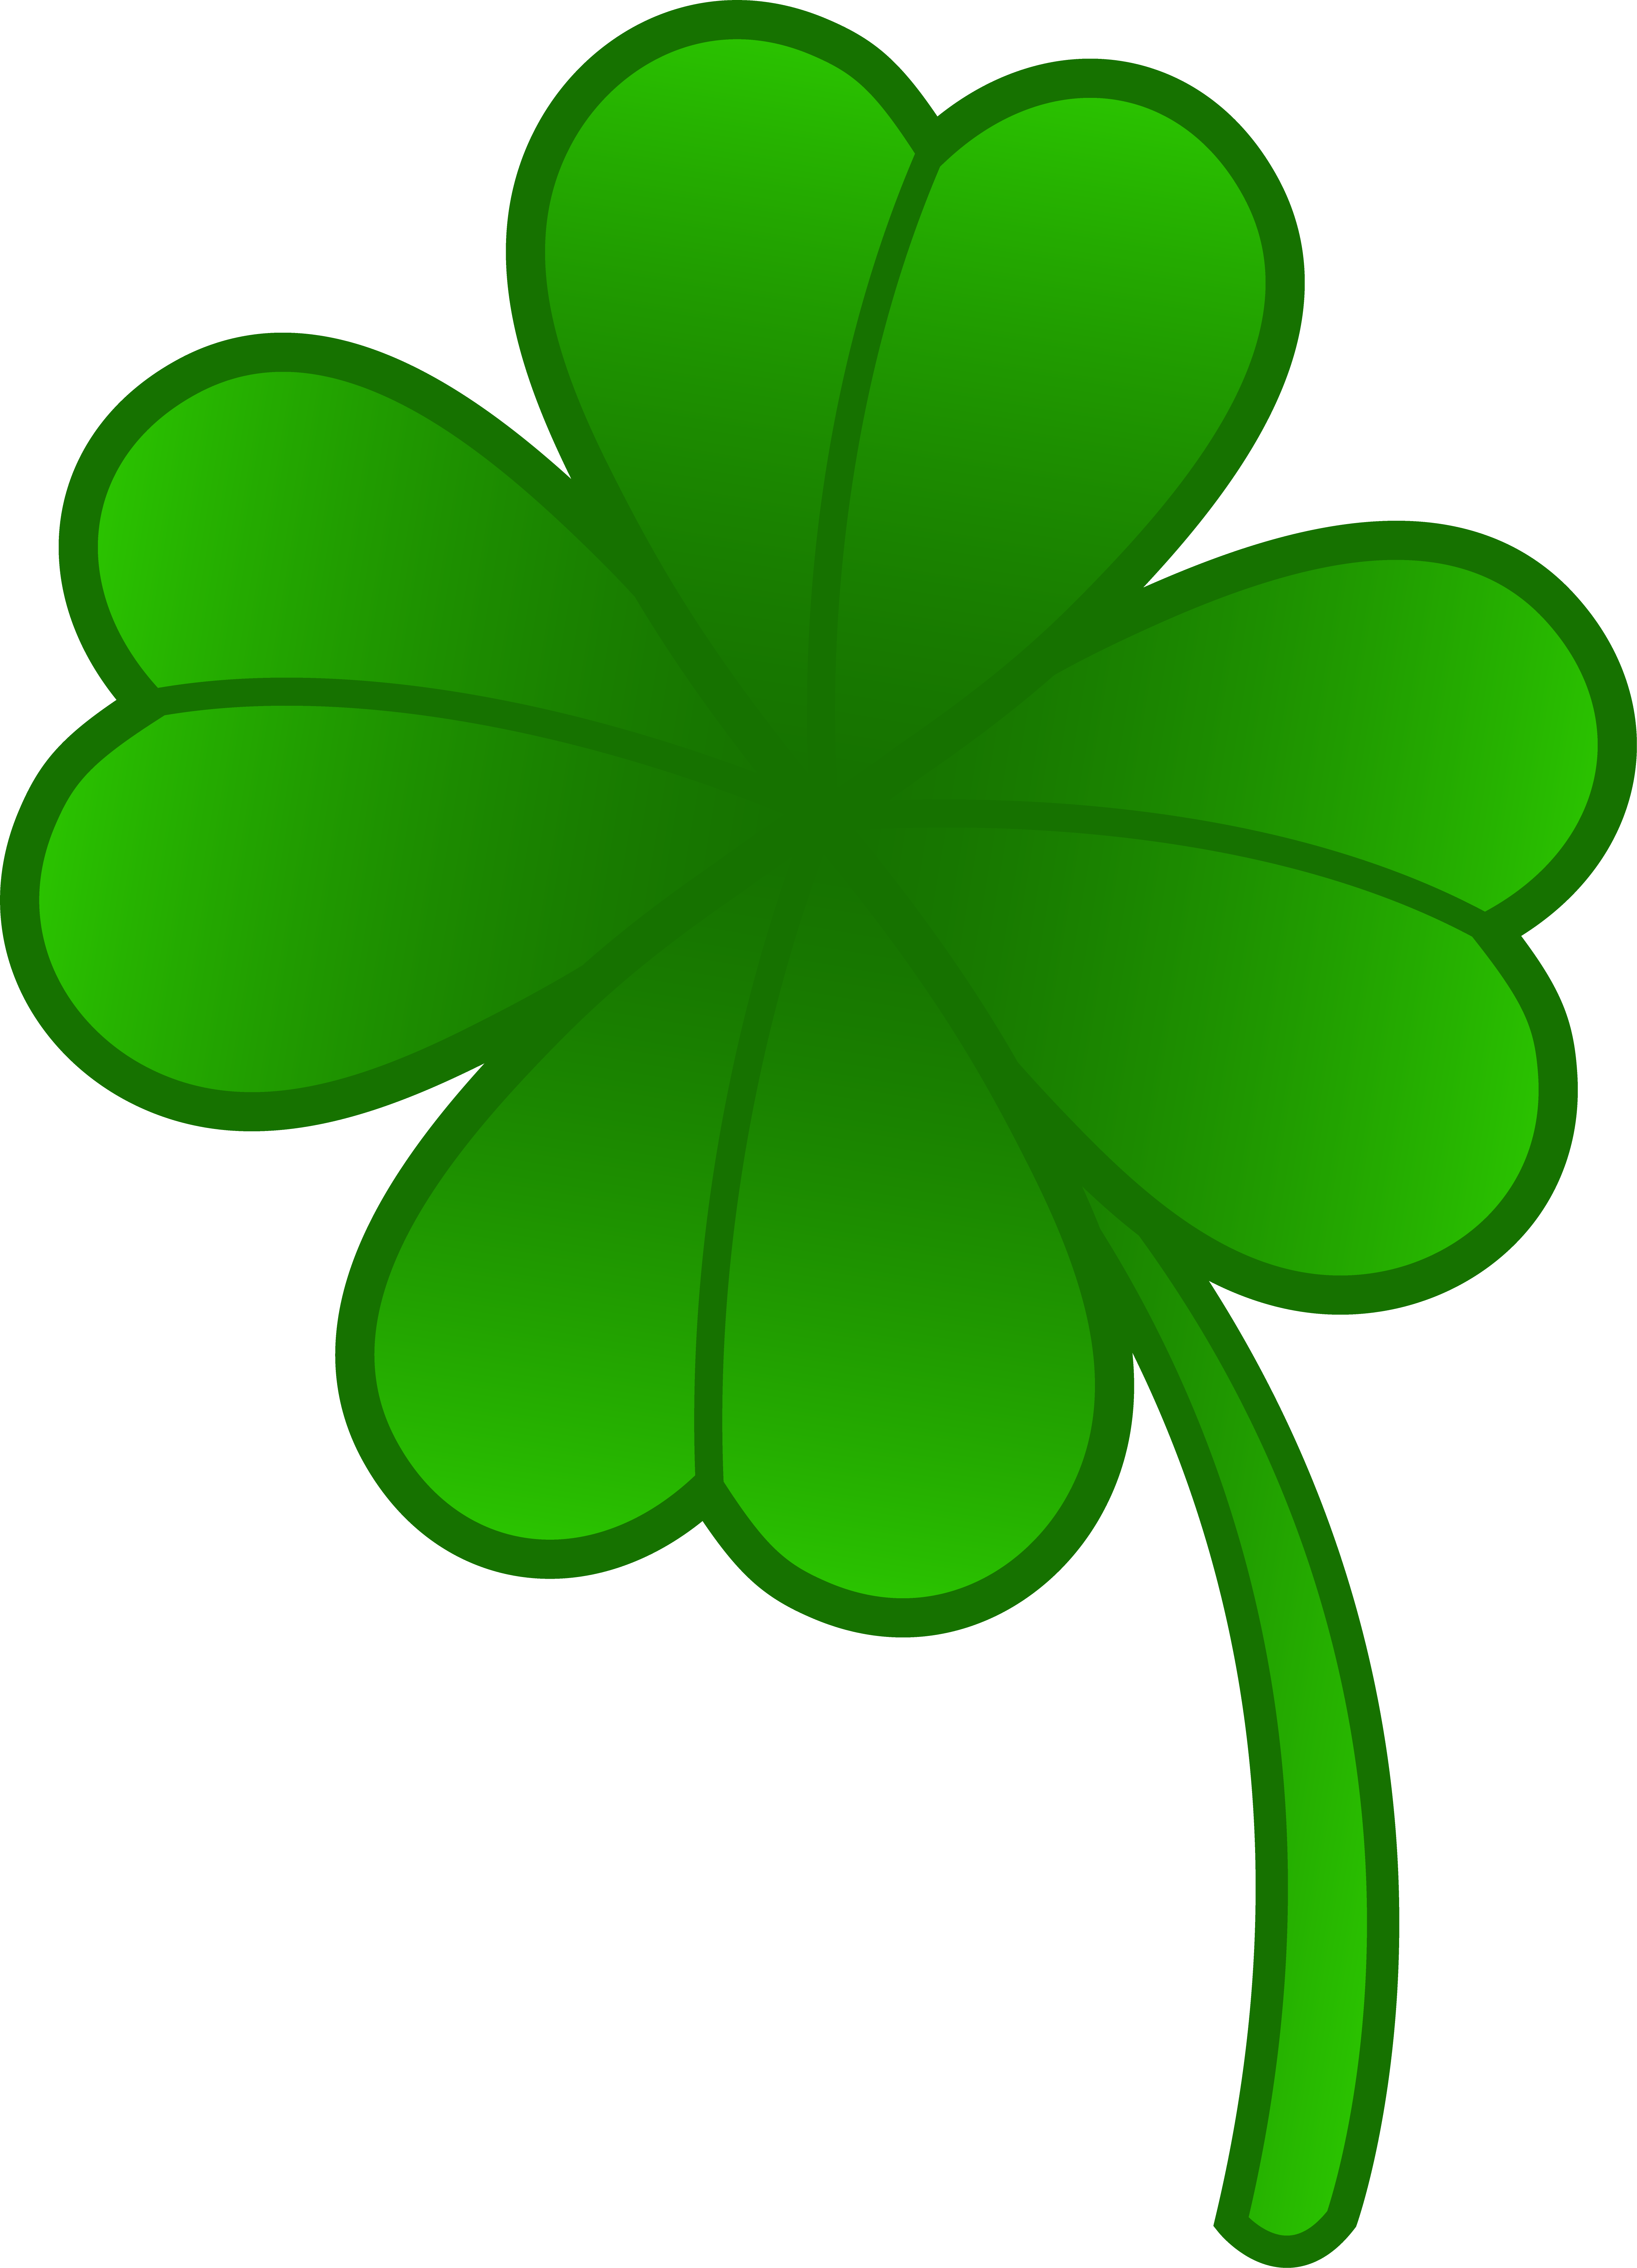 Images For > Irish Clover